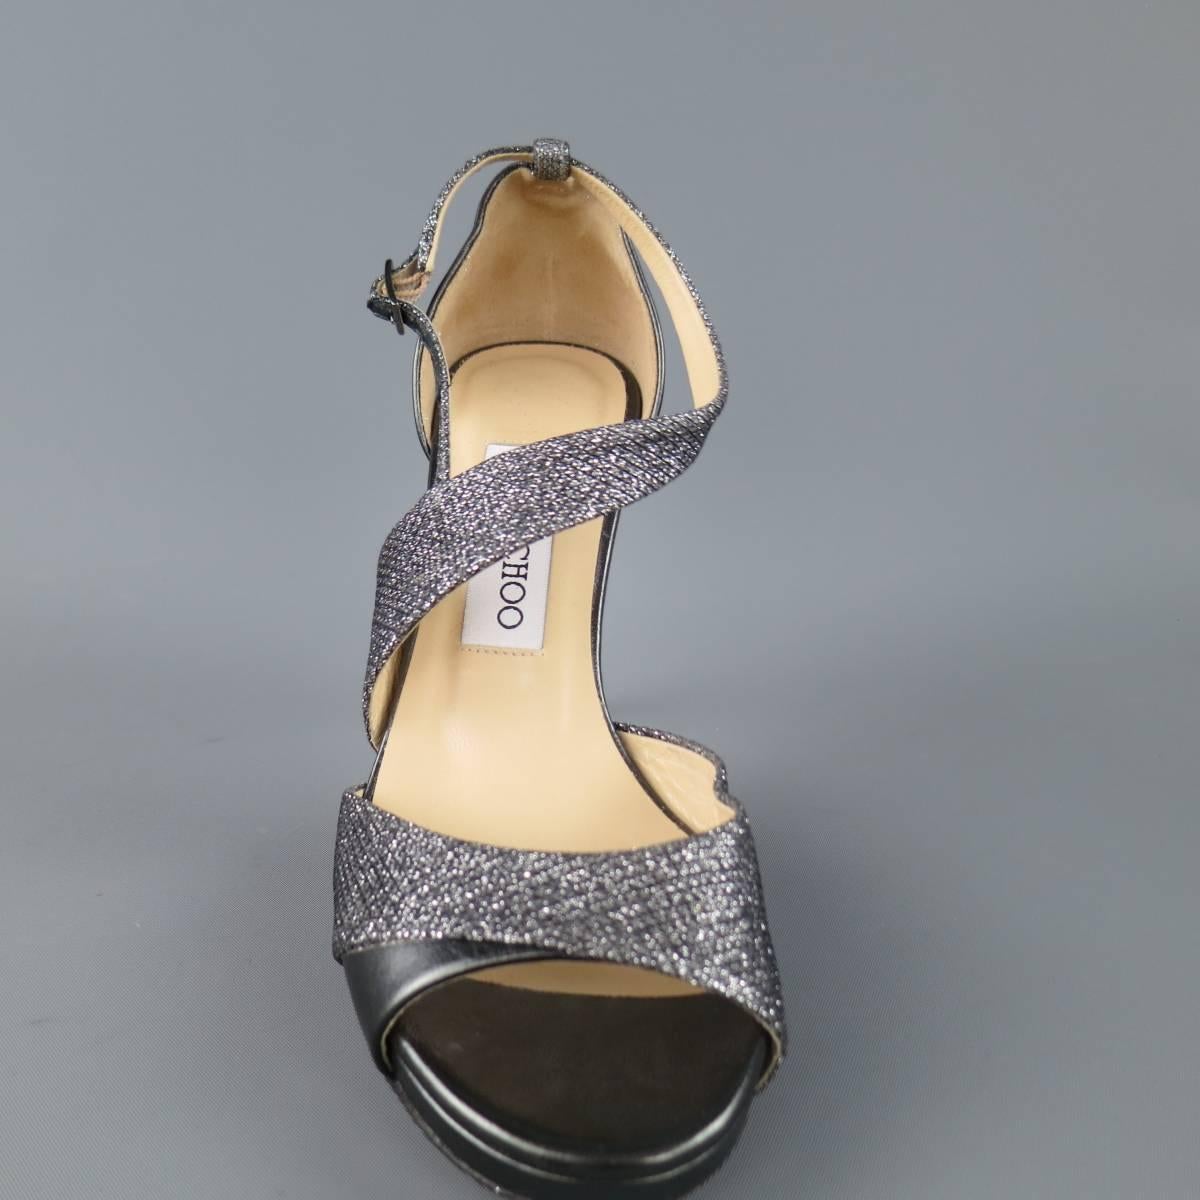 JIMMY CHOO "Tyne" sandals come in anthracite metallic leathr and feature a diagonal metallic fabric strap and metallic heel. Imperfection on right heel. As-Is. Made in Italy.
 
Good Pre-Owned Condition.
Marked: IT 36
 
Heel: 4